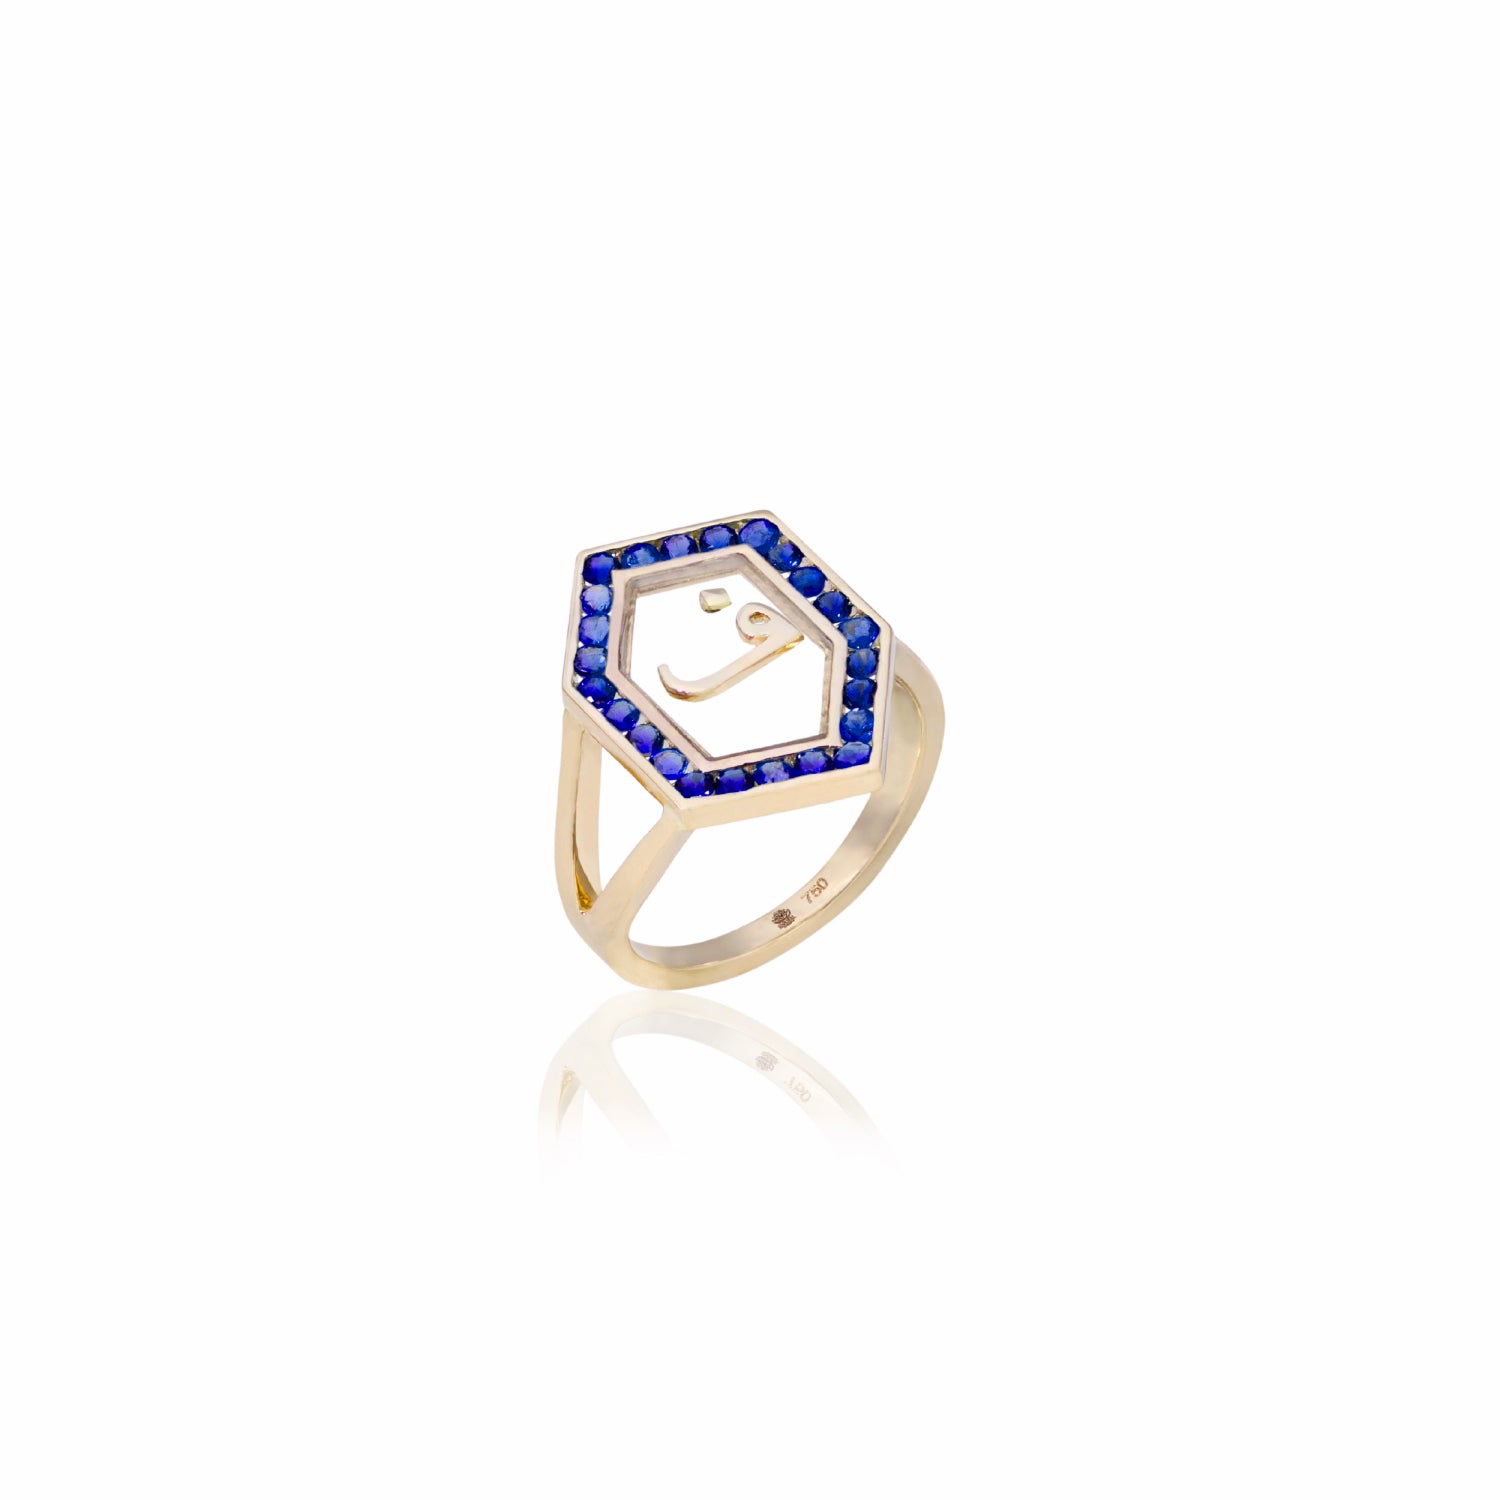 Qamoos 1.0 Letter ف Sapphire Ring in Yellow Gold